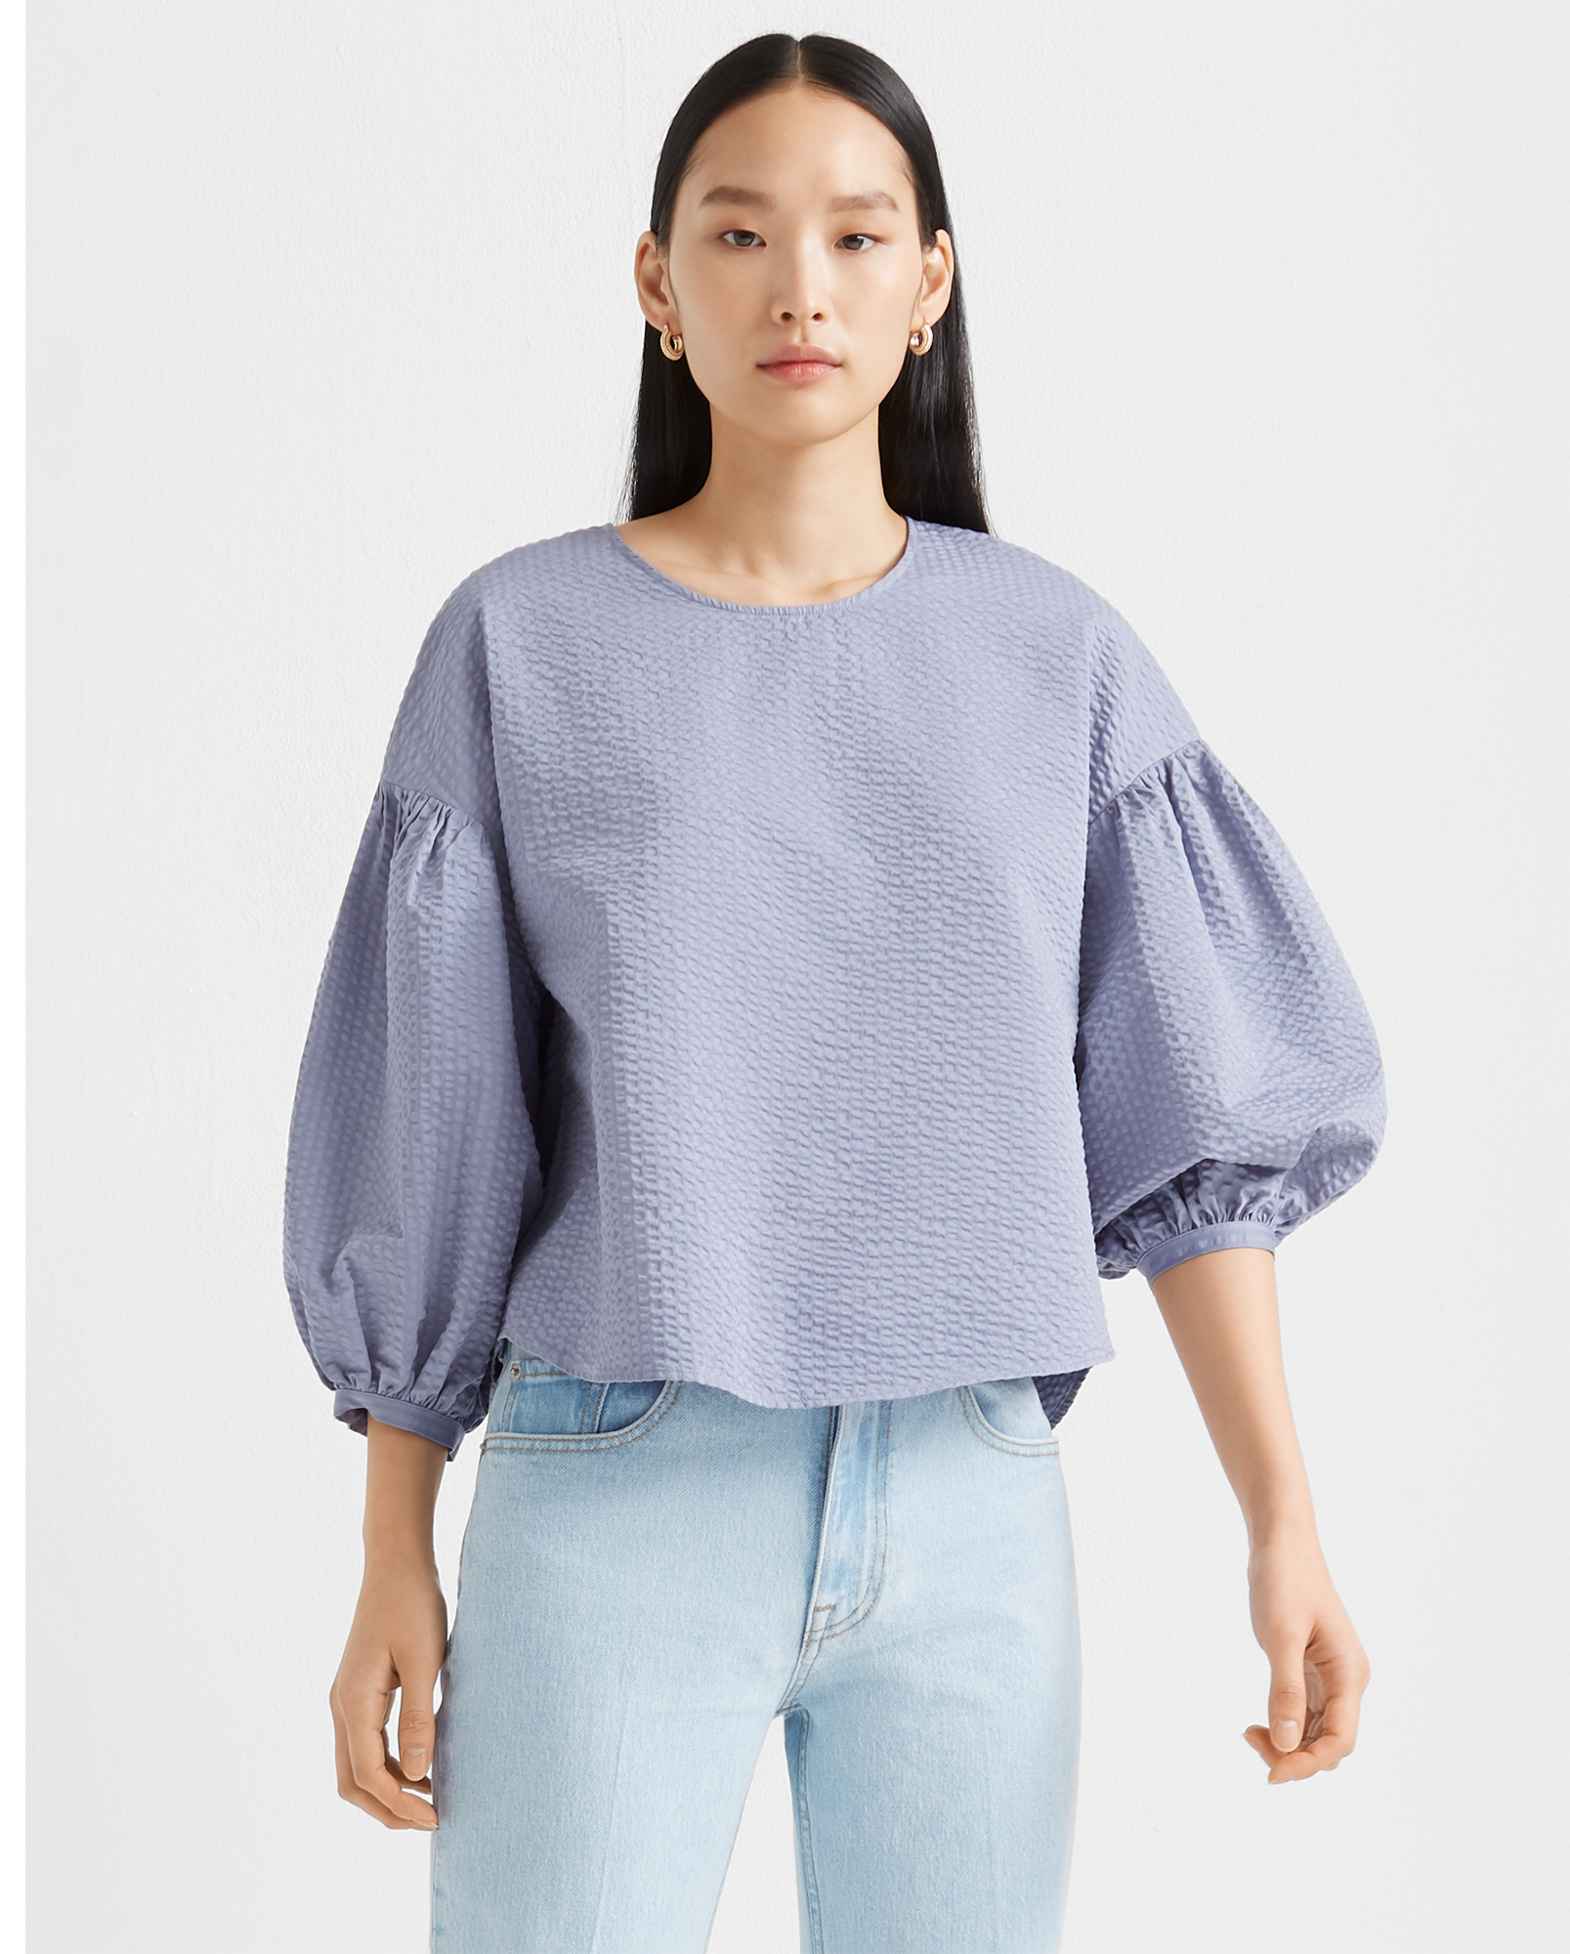 16 Fun Tops for Anyone Who Is Tired of Wearing Sweaters - FASHION Magazine